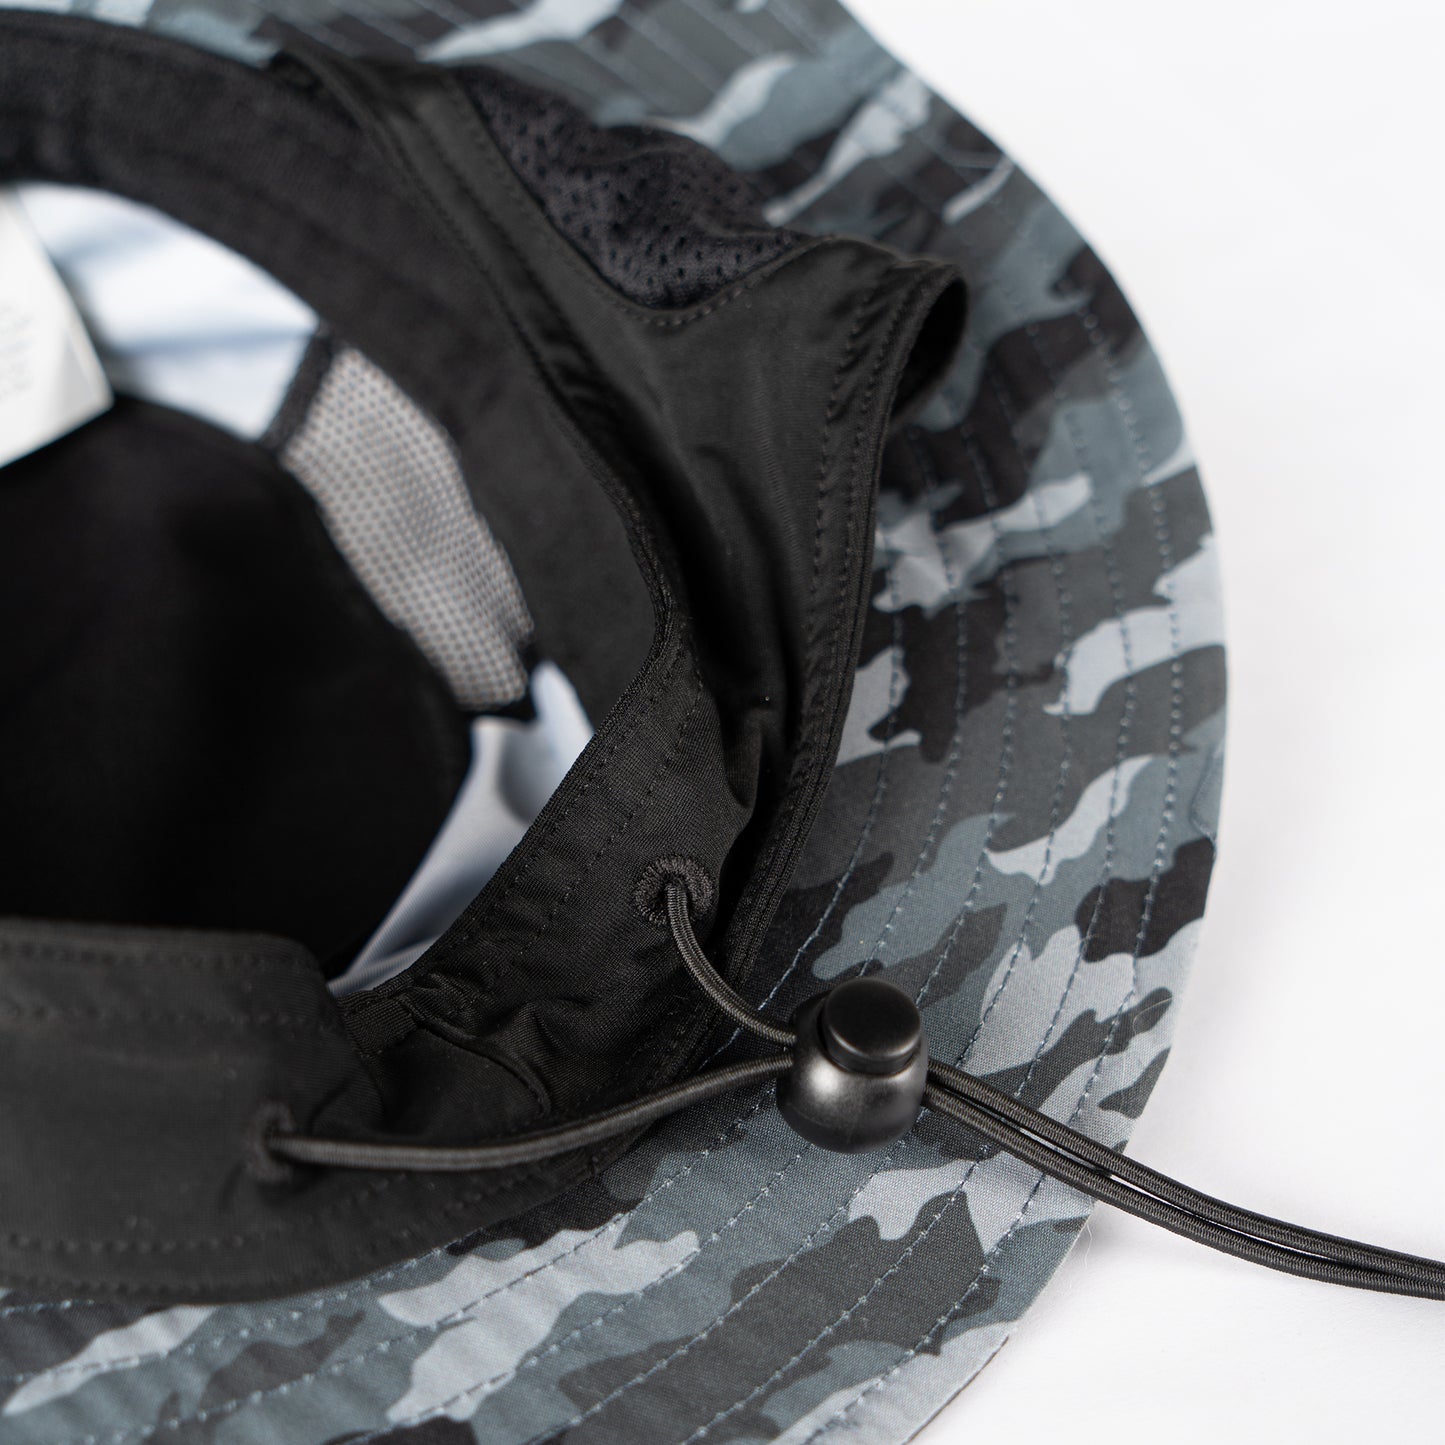 Essential Camo Water Hat